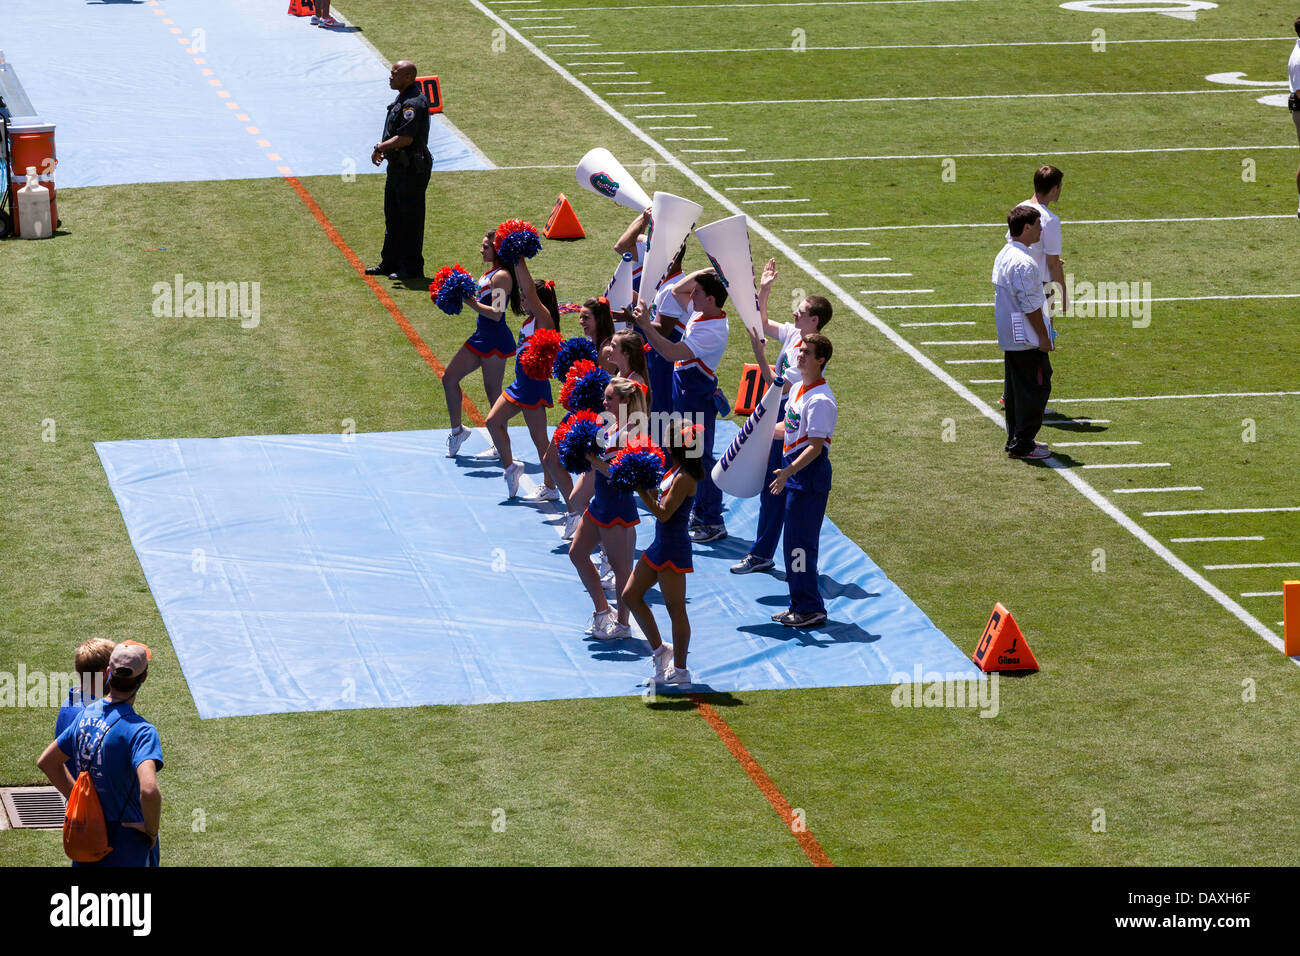 UF Gators cheerleaders 2013 Annual Spring Orange and Blue football game Ben Hill Griffin Stadium Florida Field a.k.a. the Swamp. Stock Photo